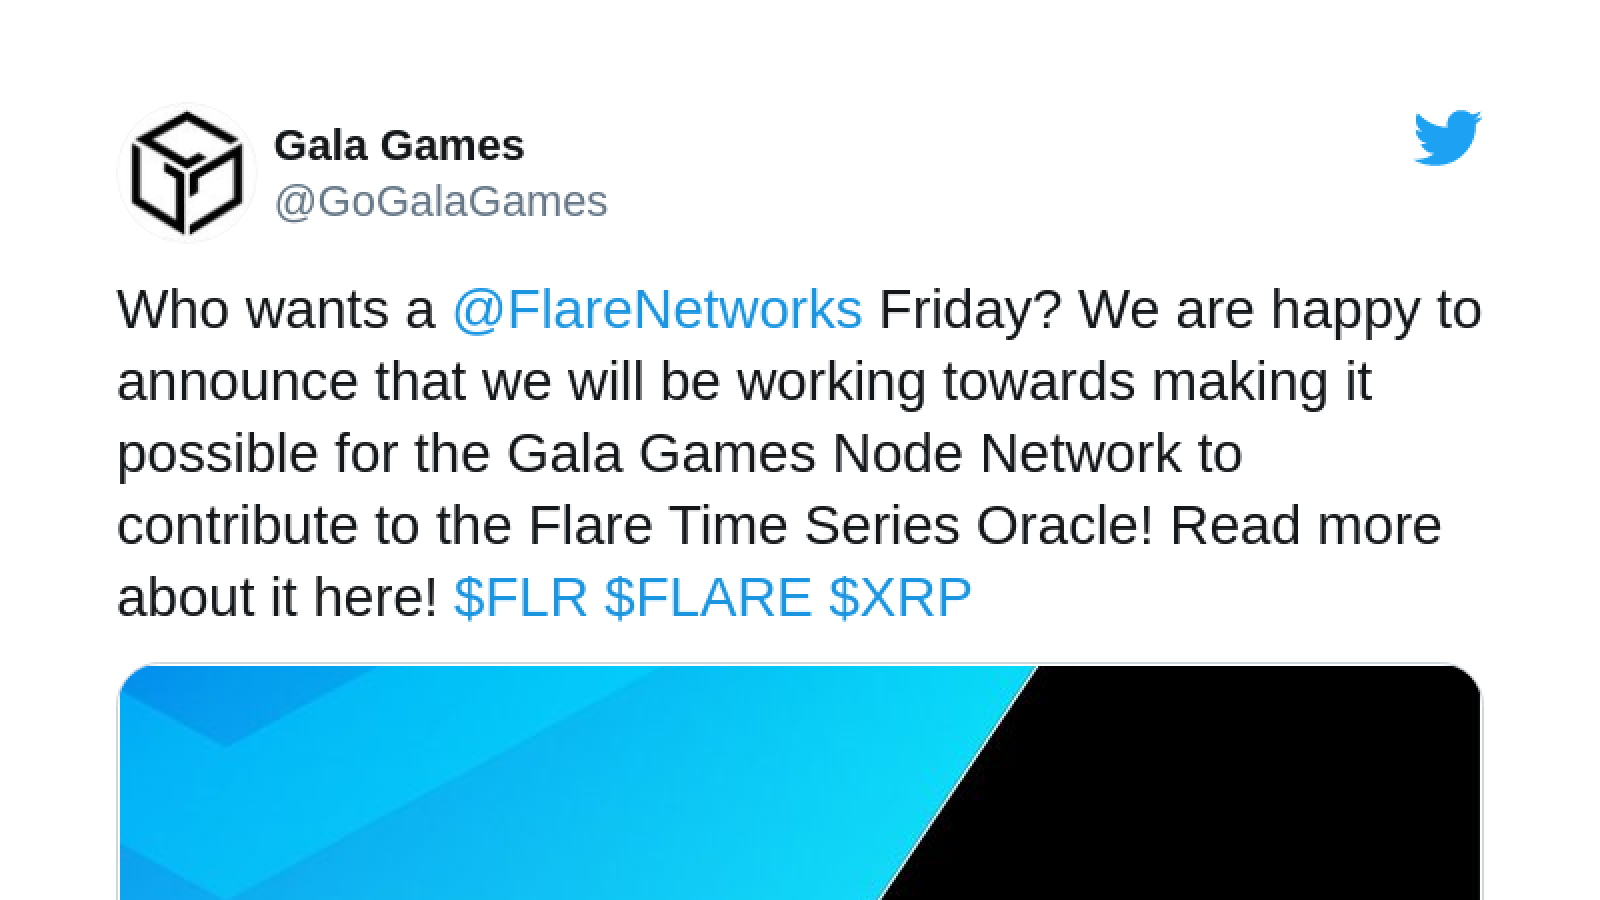 Gala Games to roll up nodes for FTSO